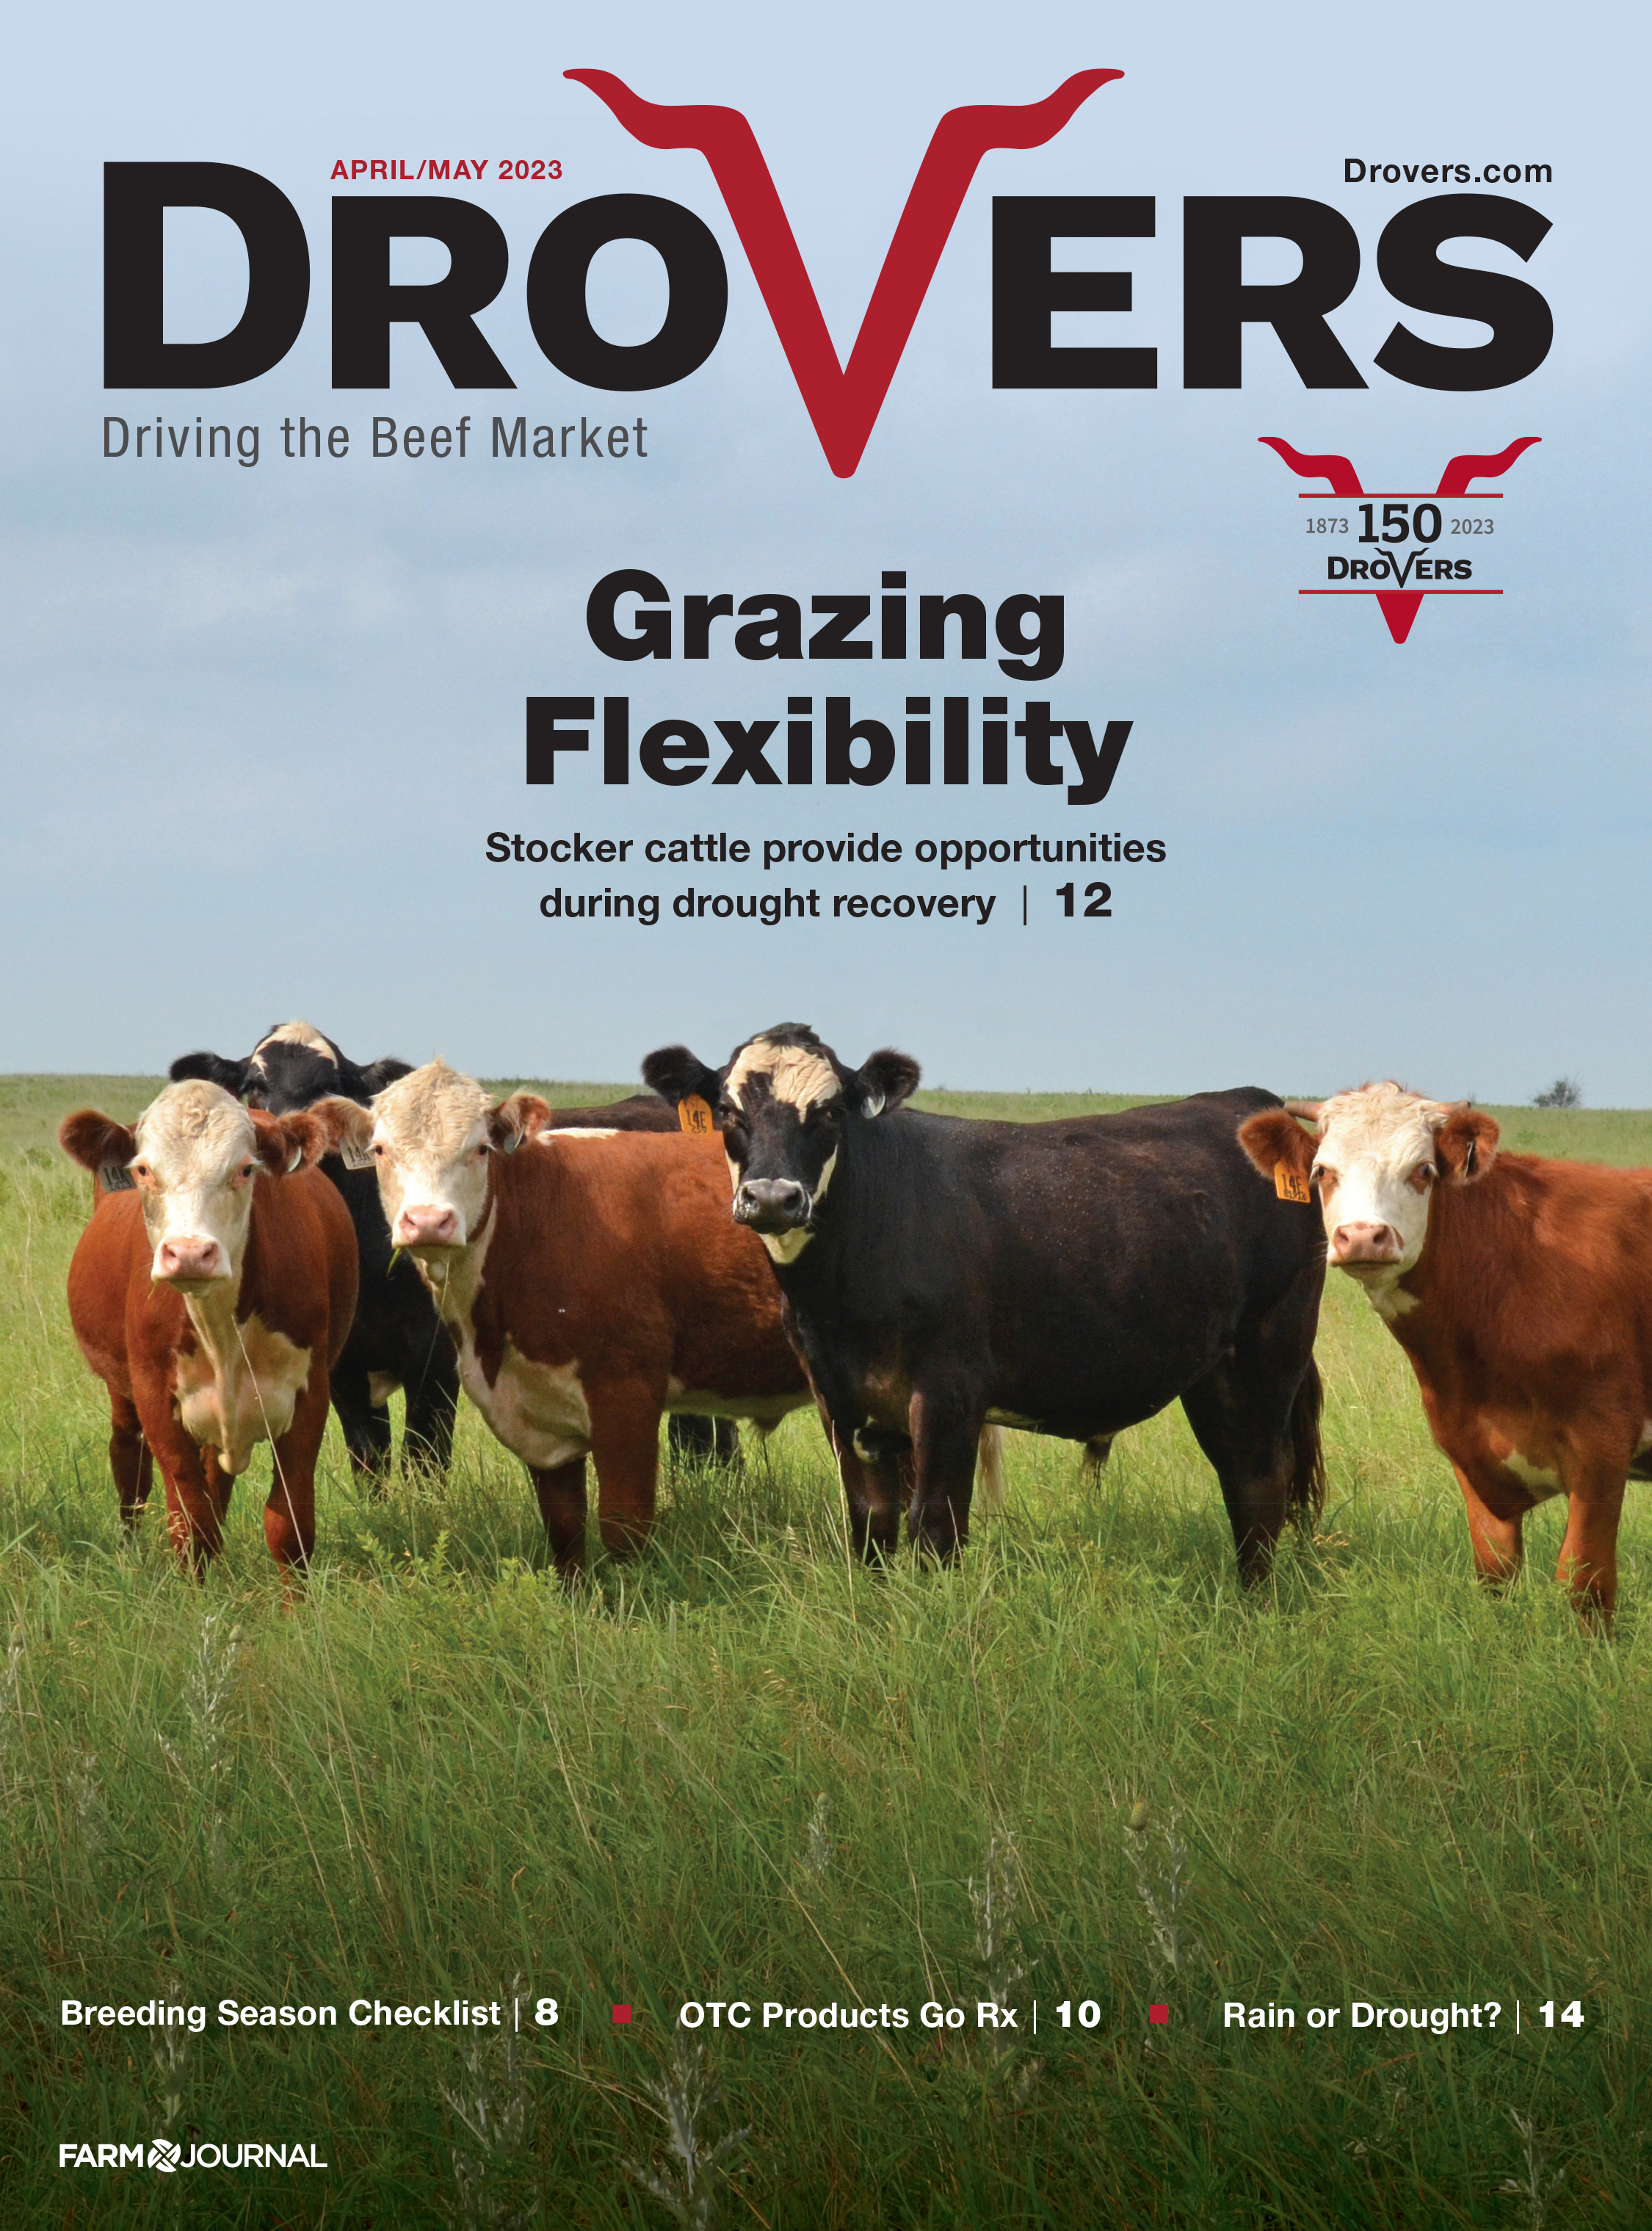  Drovers - April/May 2023 Cover 